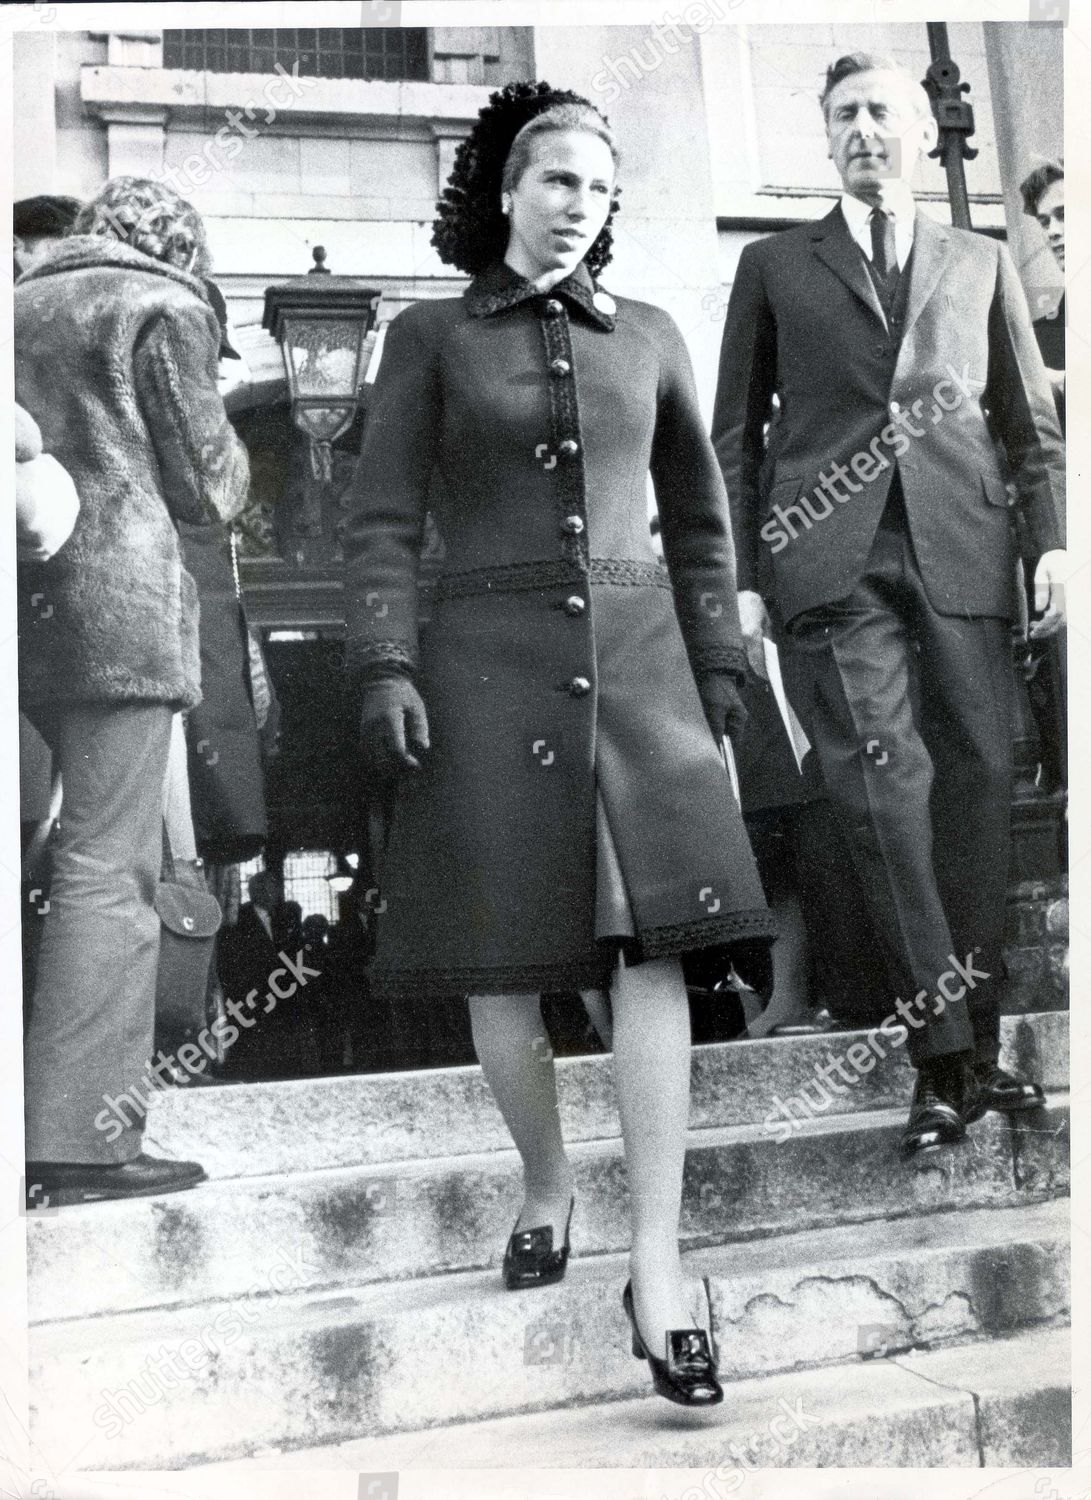 princess-anne-now-princess-royal-november-1972-princess-anne-at-memorial-service-to-uffa-fox-at-st-martin-in-the-fields-royalty-shutterstock-editorial-892360a.jpg